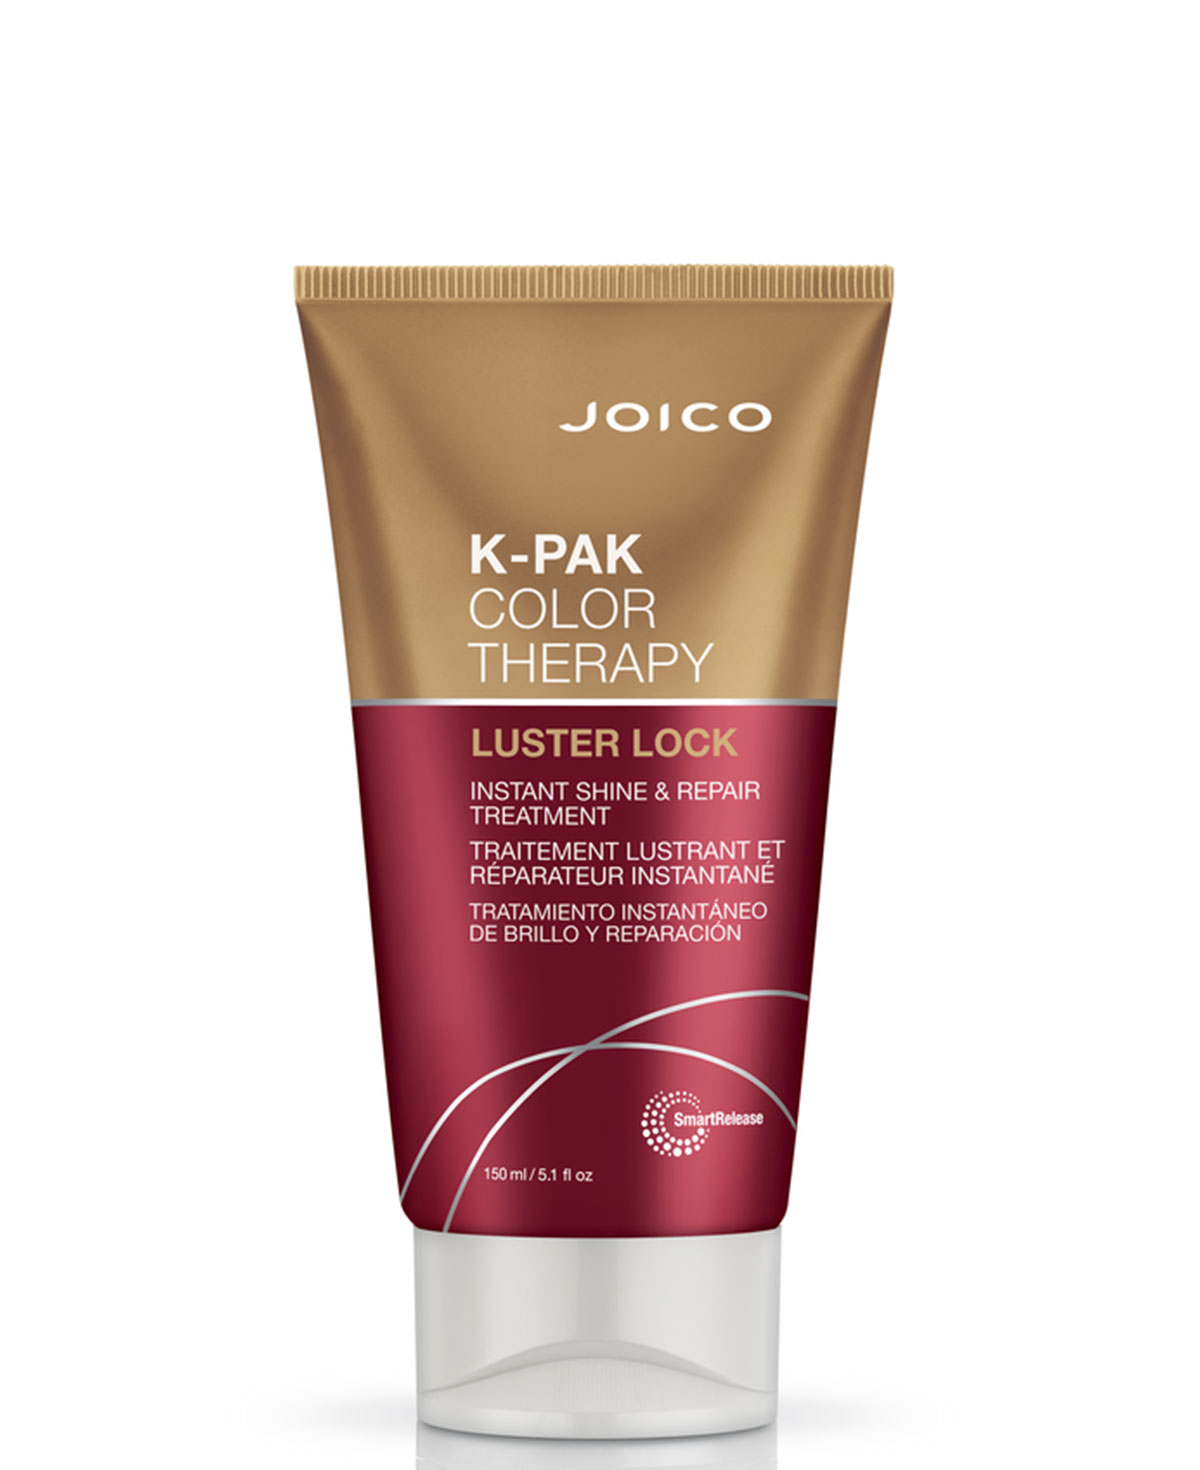 Joico K-Pak Color Therapy Luster Lock Treatment 150ml